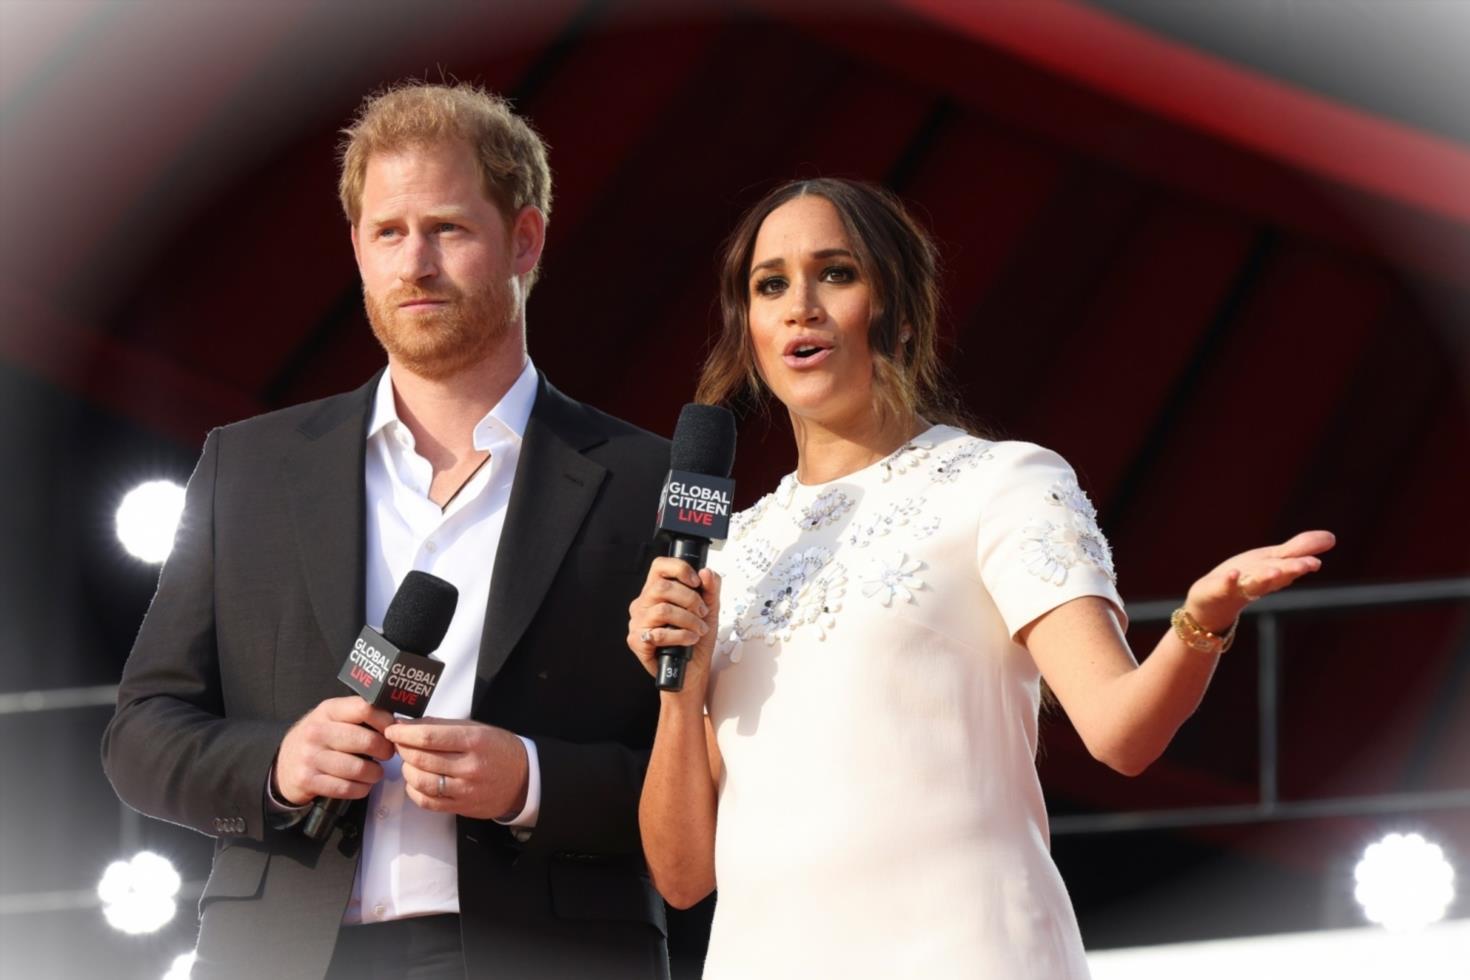 Prince Harry and Meghan Markles Titles Debated at Top Levels Yett2rrrg5uO 1